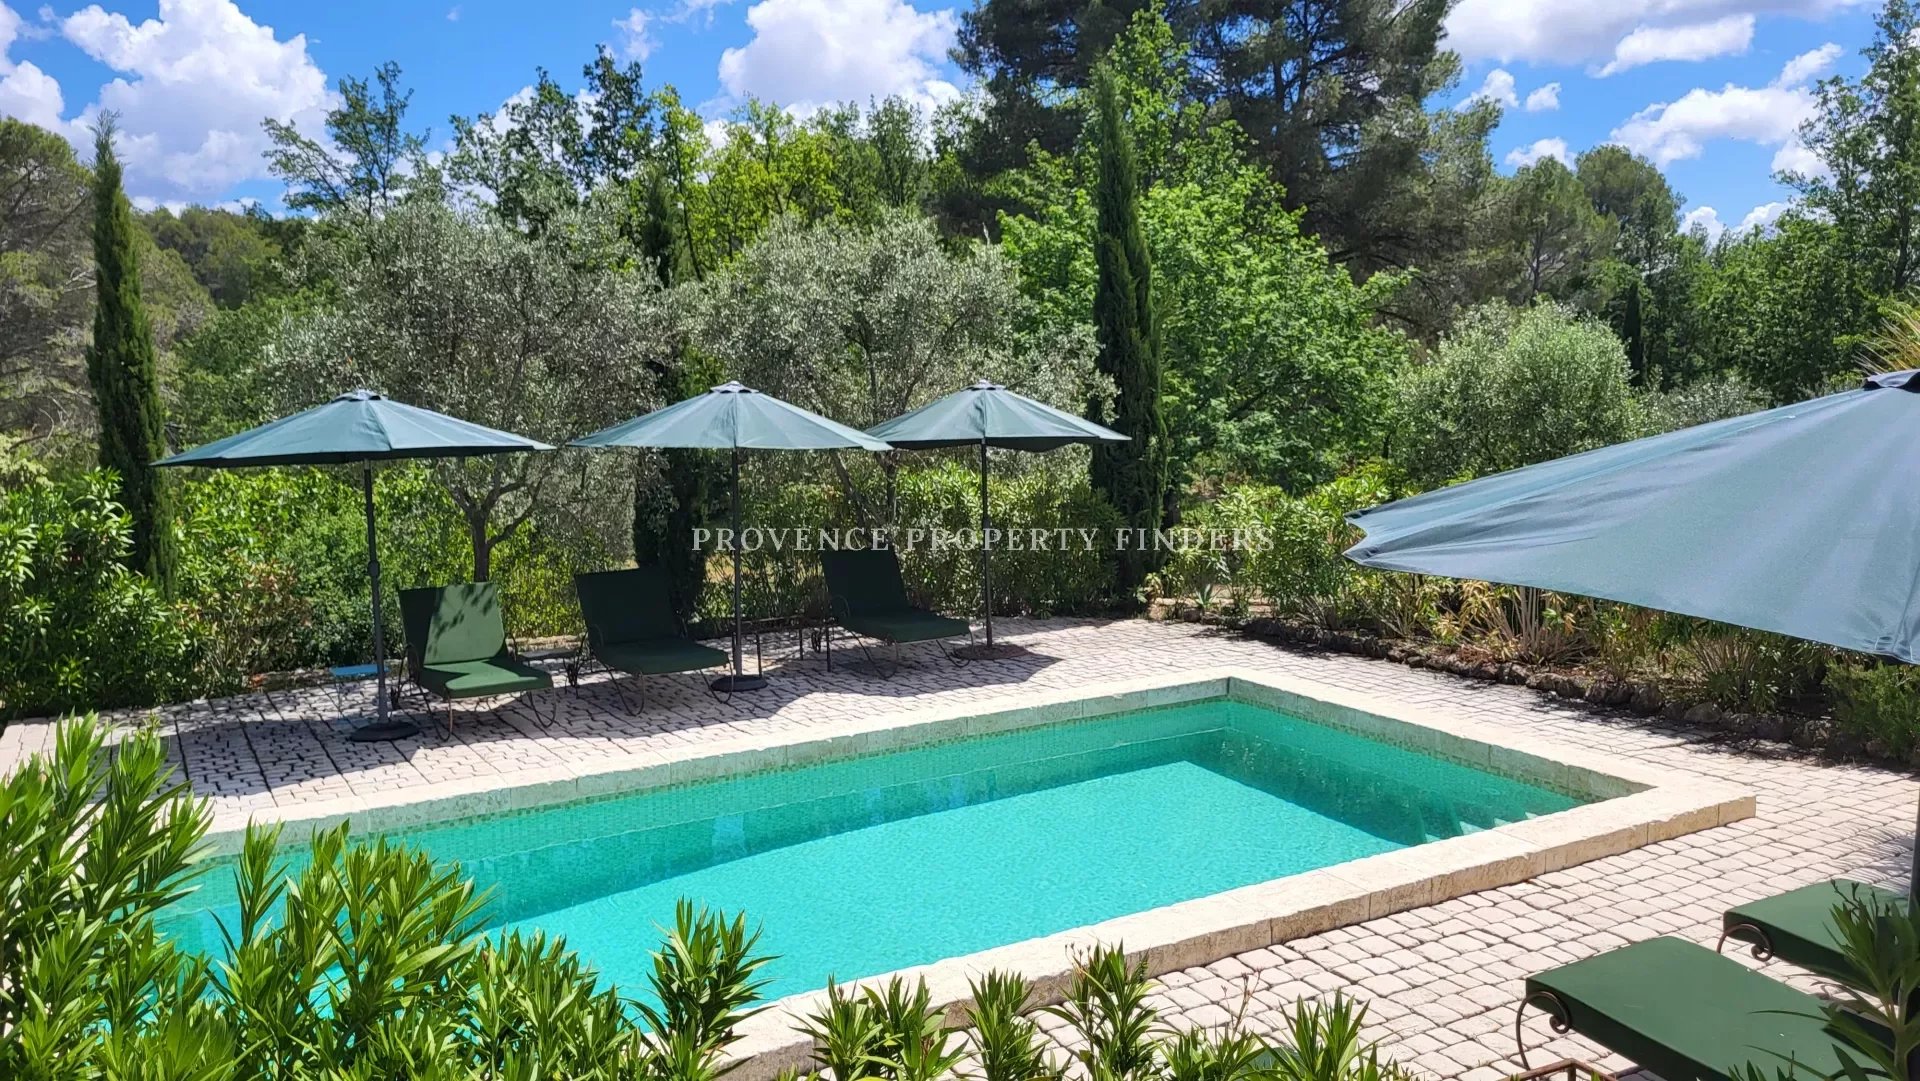 Flayosquet Charming Bastide for sale with 6 bedrooms on 1.3 ha of land.